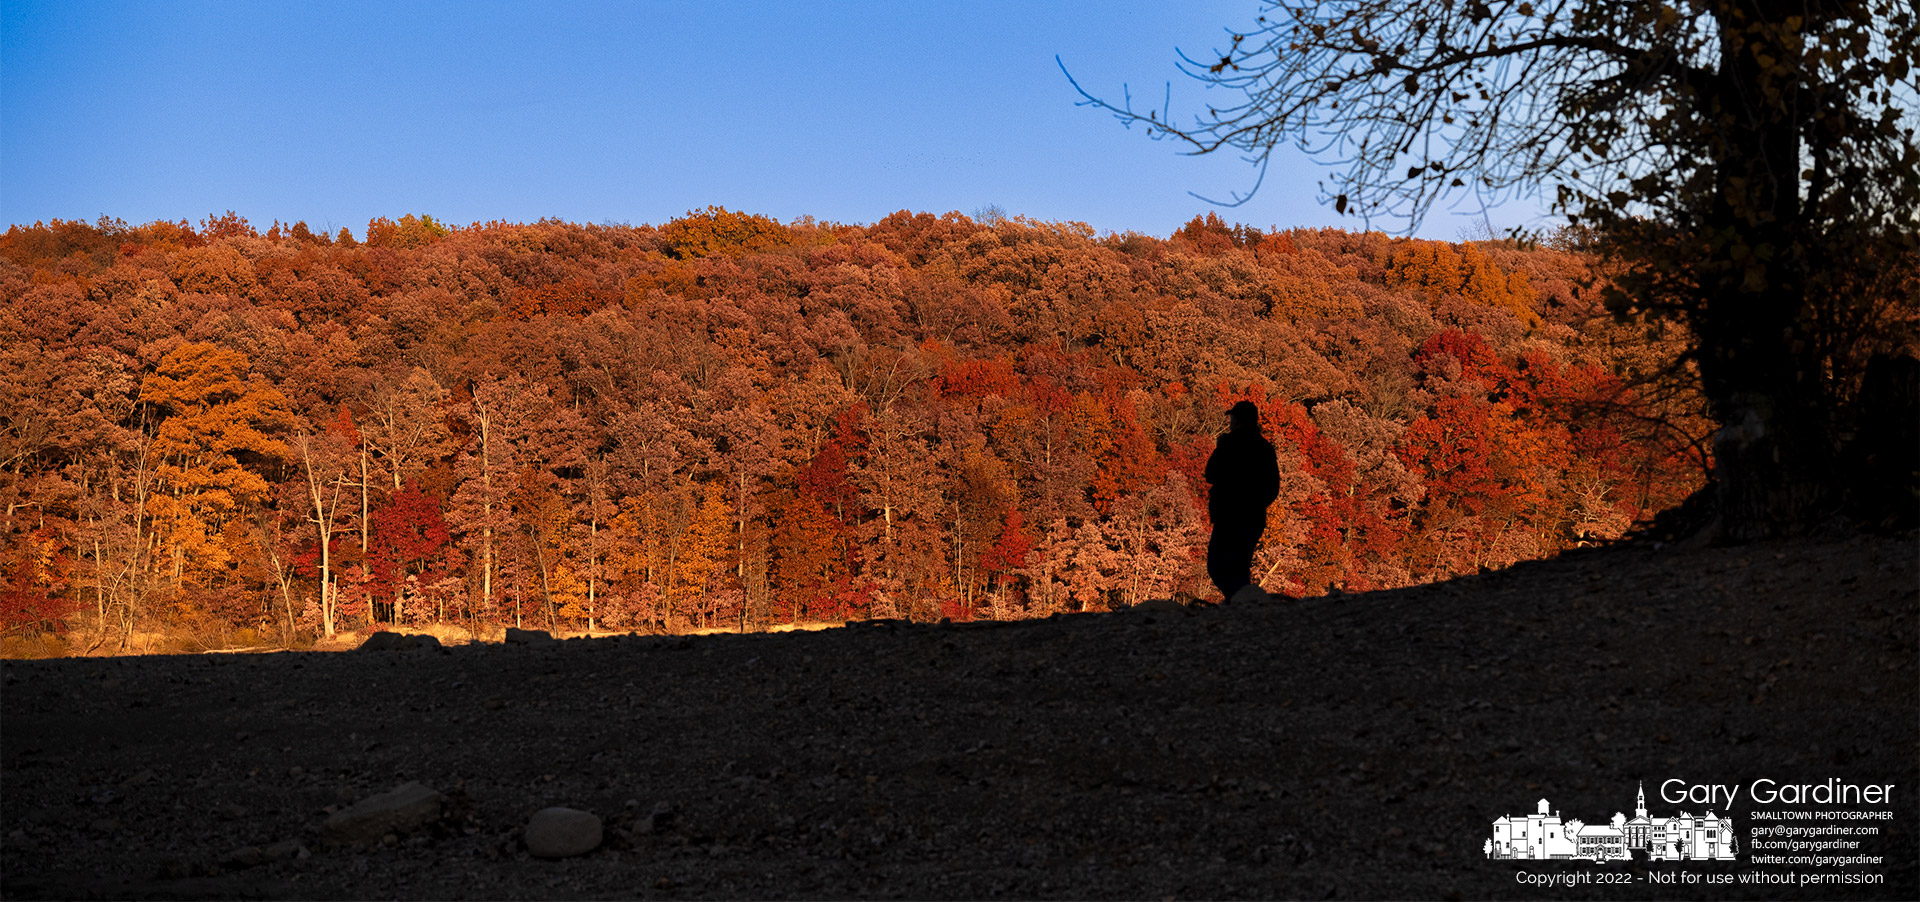 A man walks in shadows along the shoreline of Hoover Reservoir where the sunset shines on the trees across the lake. My Final Photo for October 28, 2022.